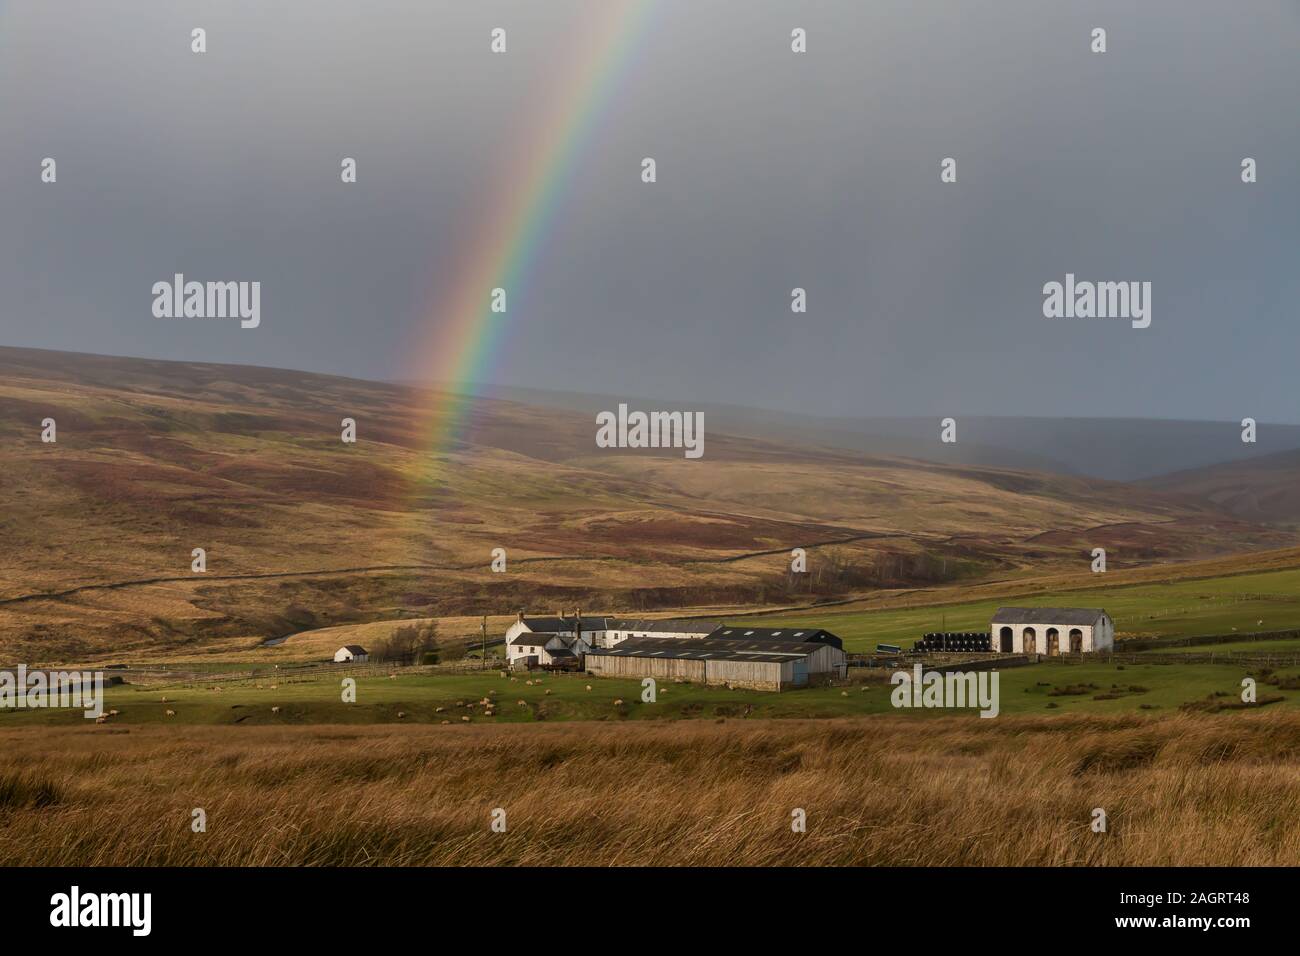 Vivid Rainbow at Middle End Farm, Teesdale after Storm Atiyah 8 Dec 2019 Stock Photo